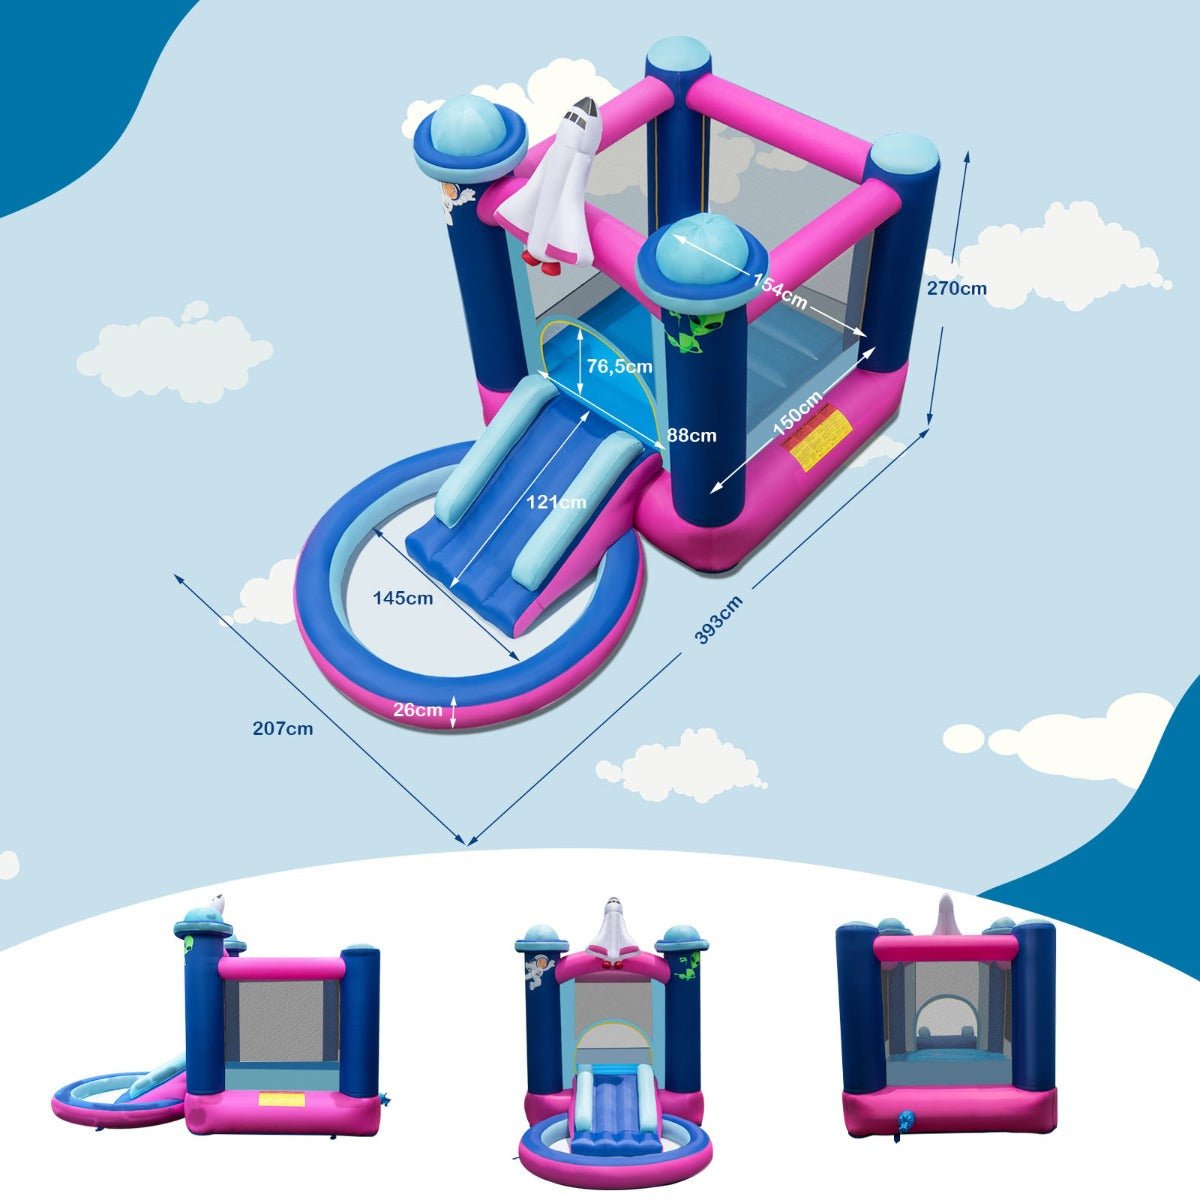 Space Adventure Inflatable with Jumping Area & Slide - Cosmic Fun